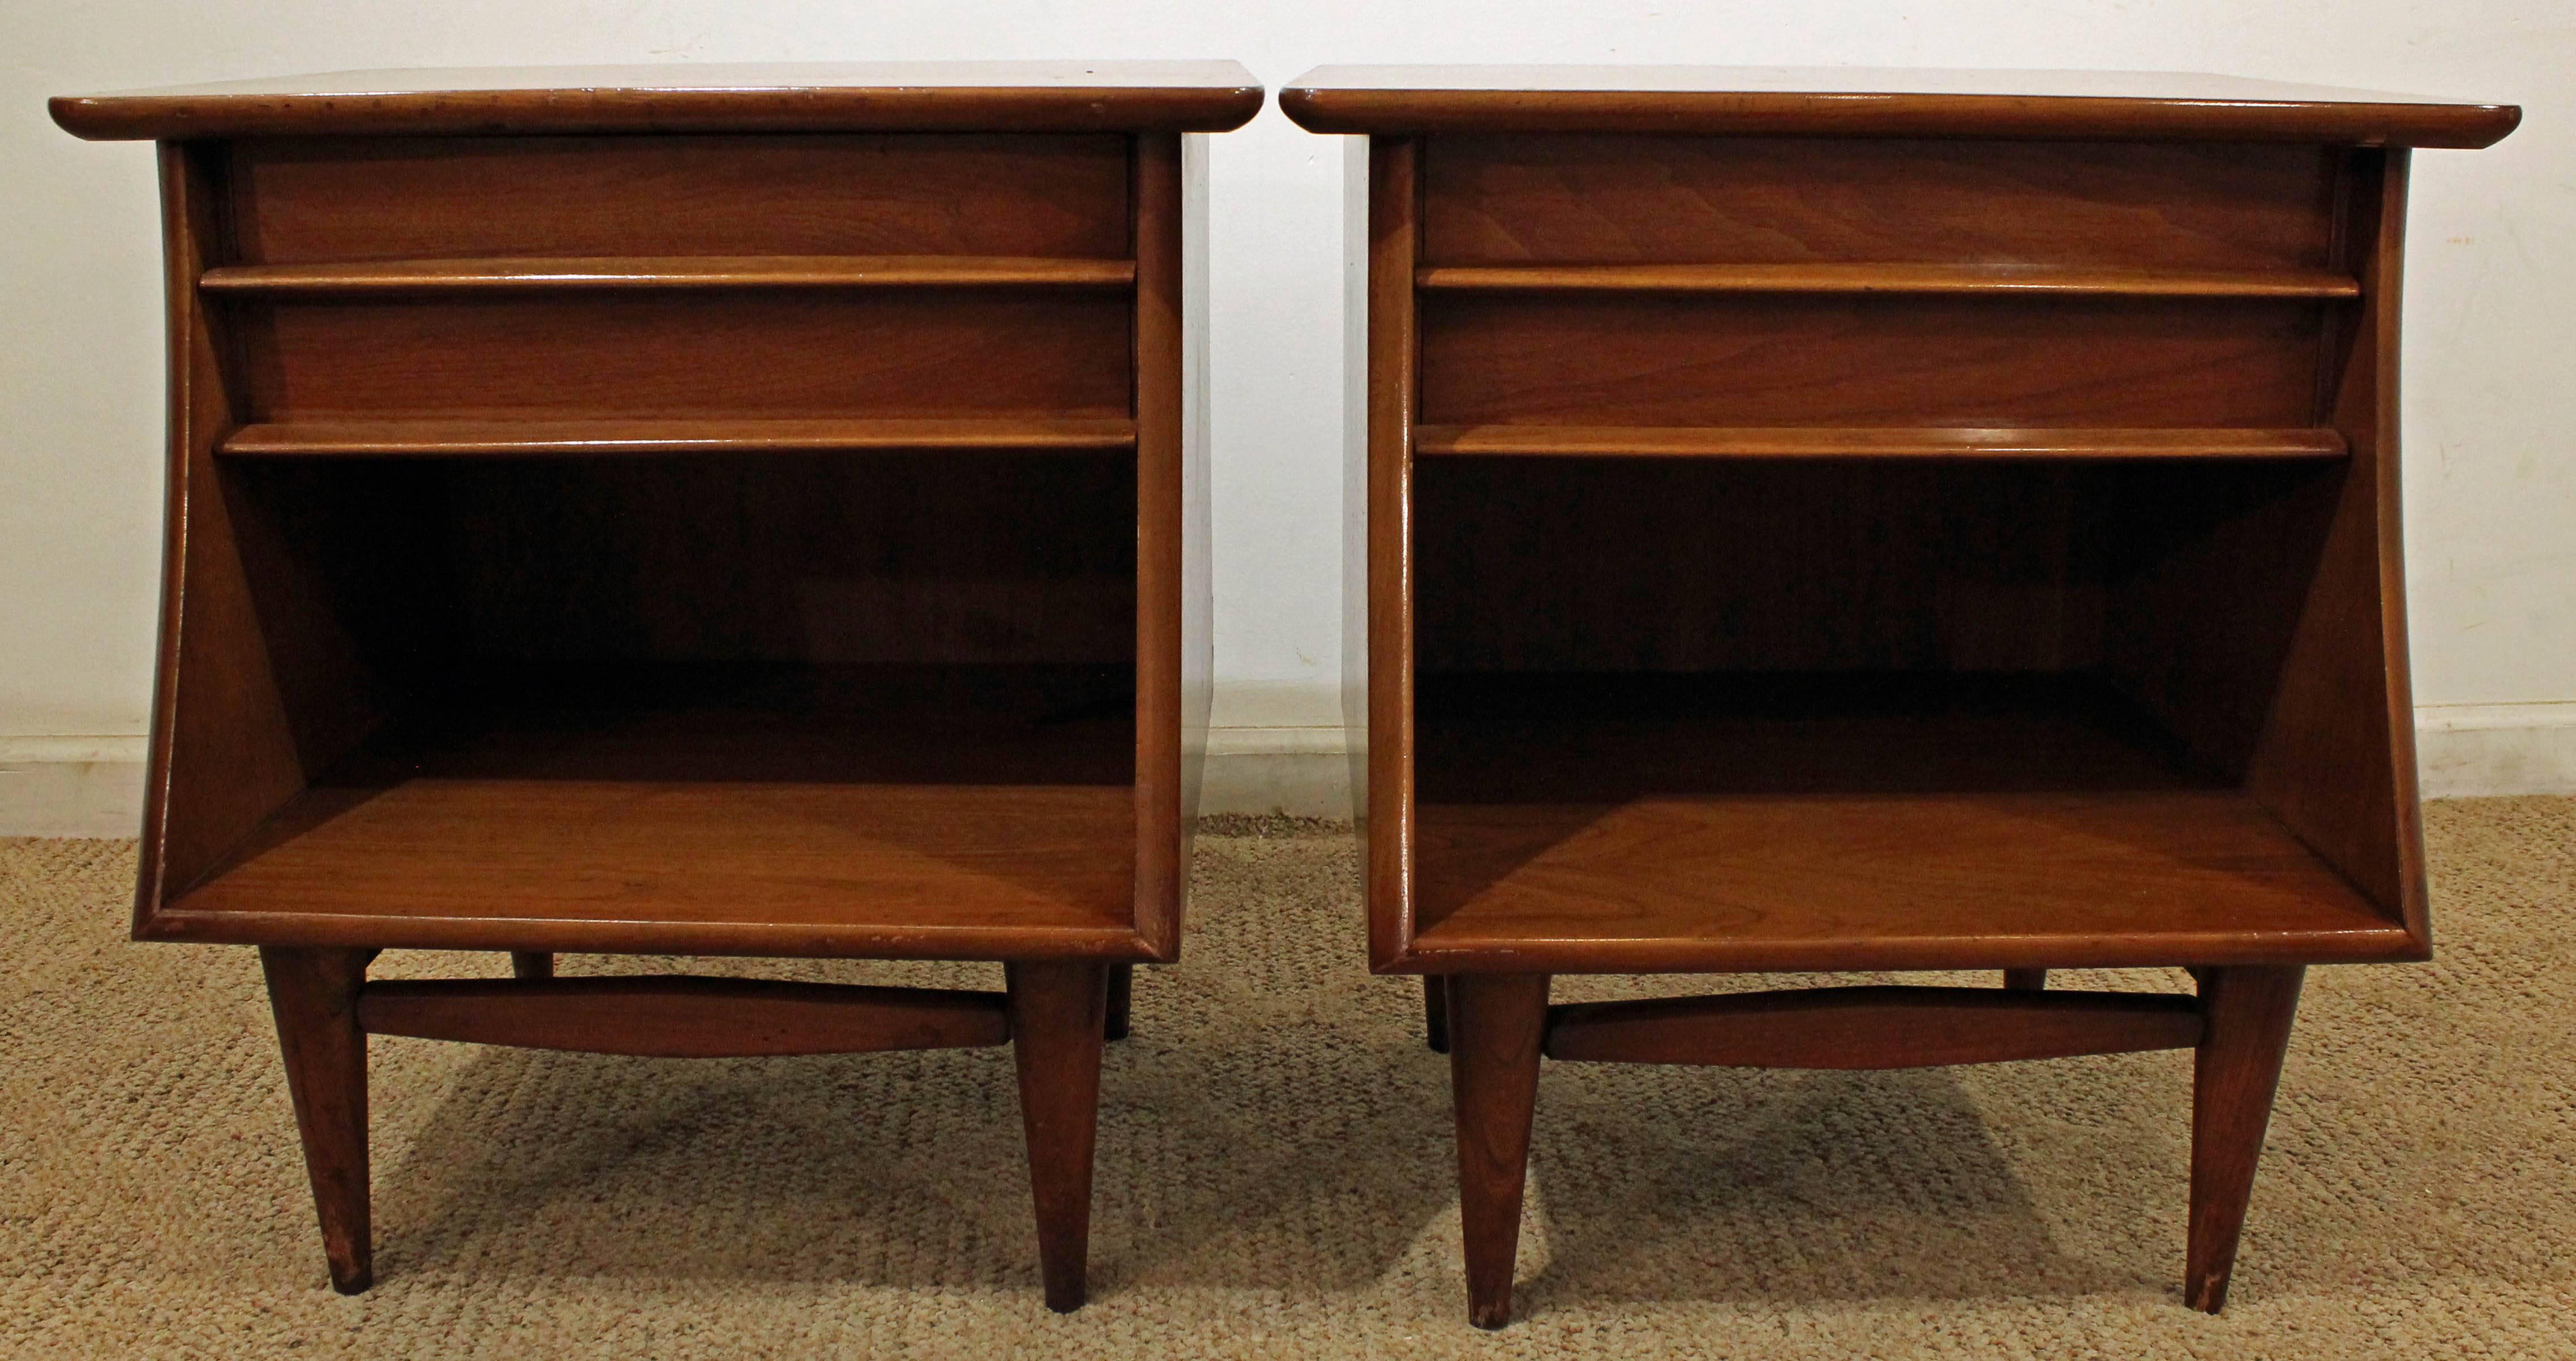 Offered is a pair of nightstands, made by Kent Coffey 